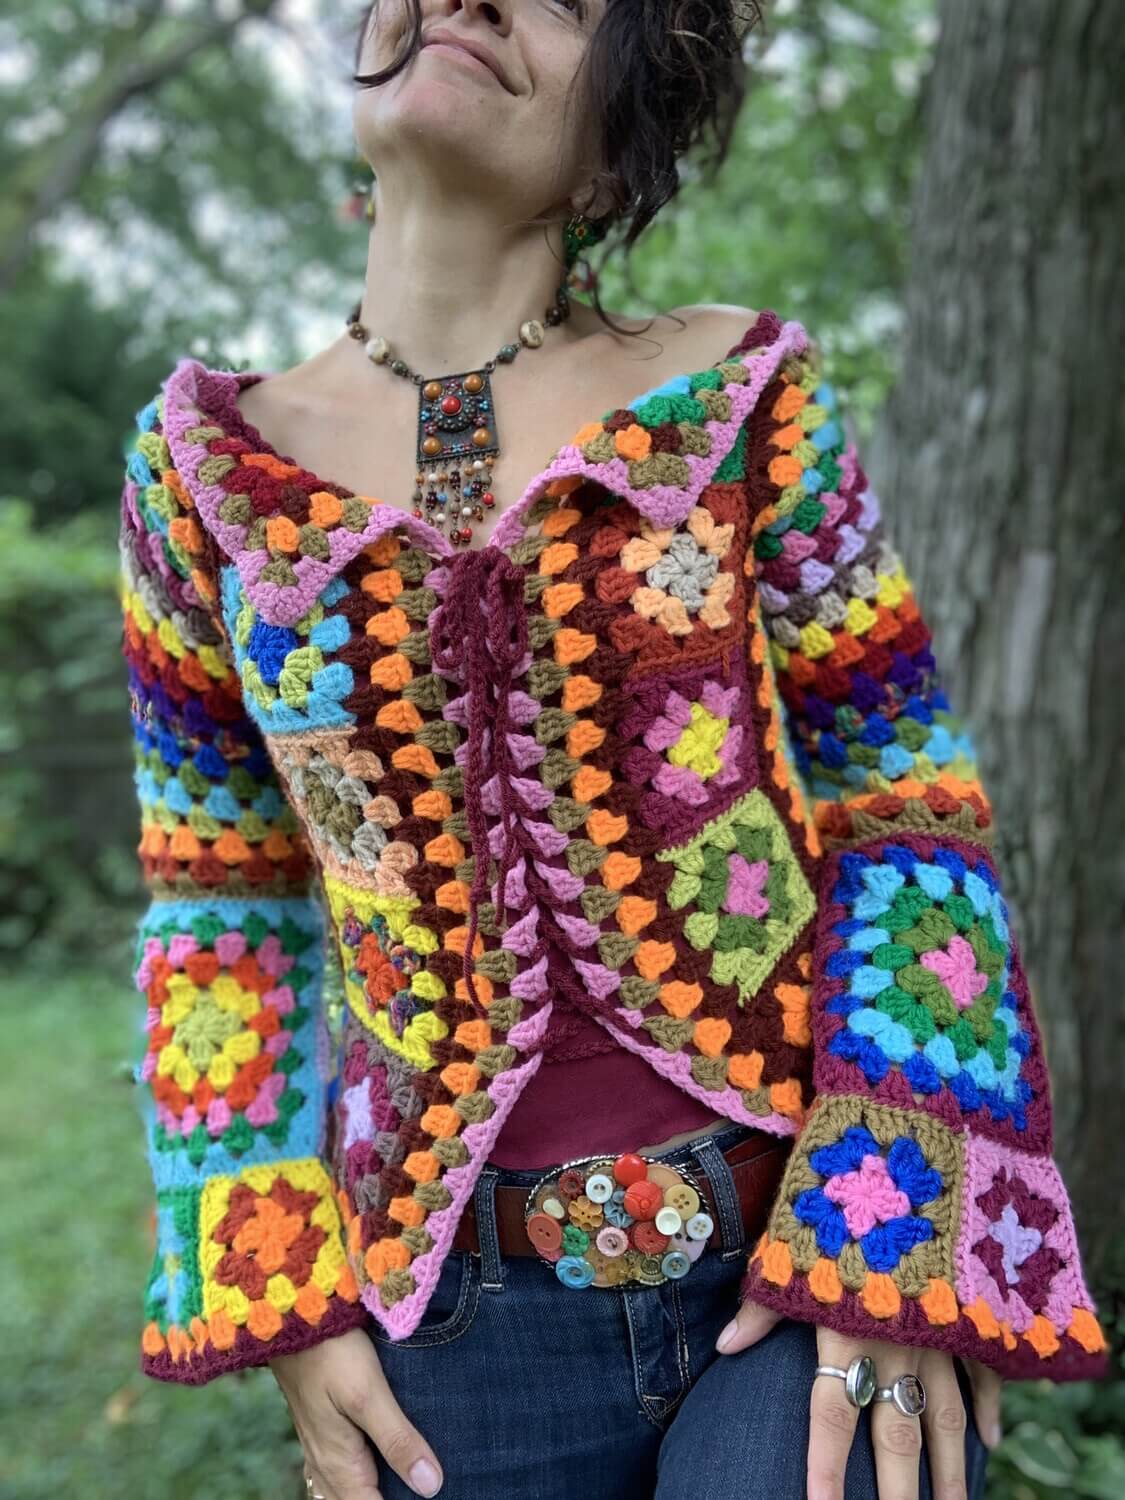 15 Crochet Granny Square Jacket Cardigan Free Pattern,How Long To Defrost Turkey In Refrigerator